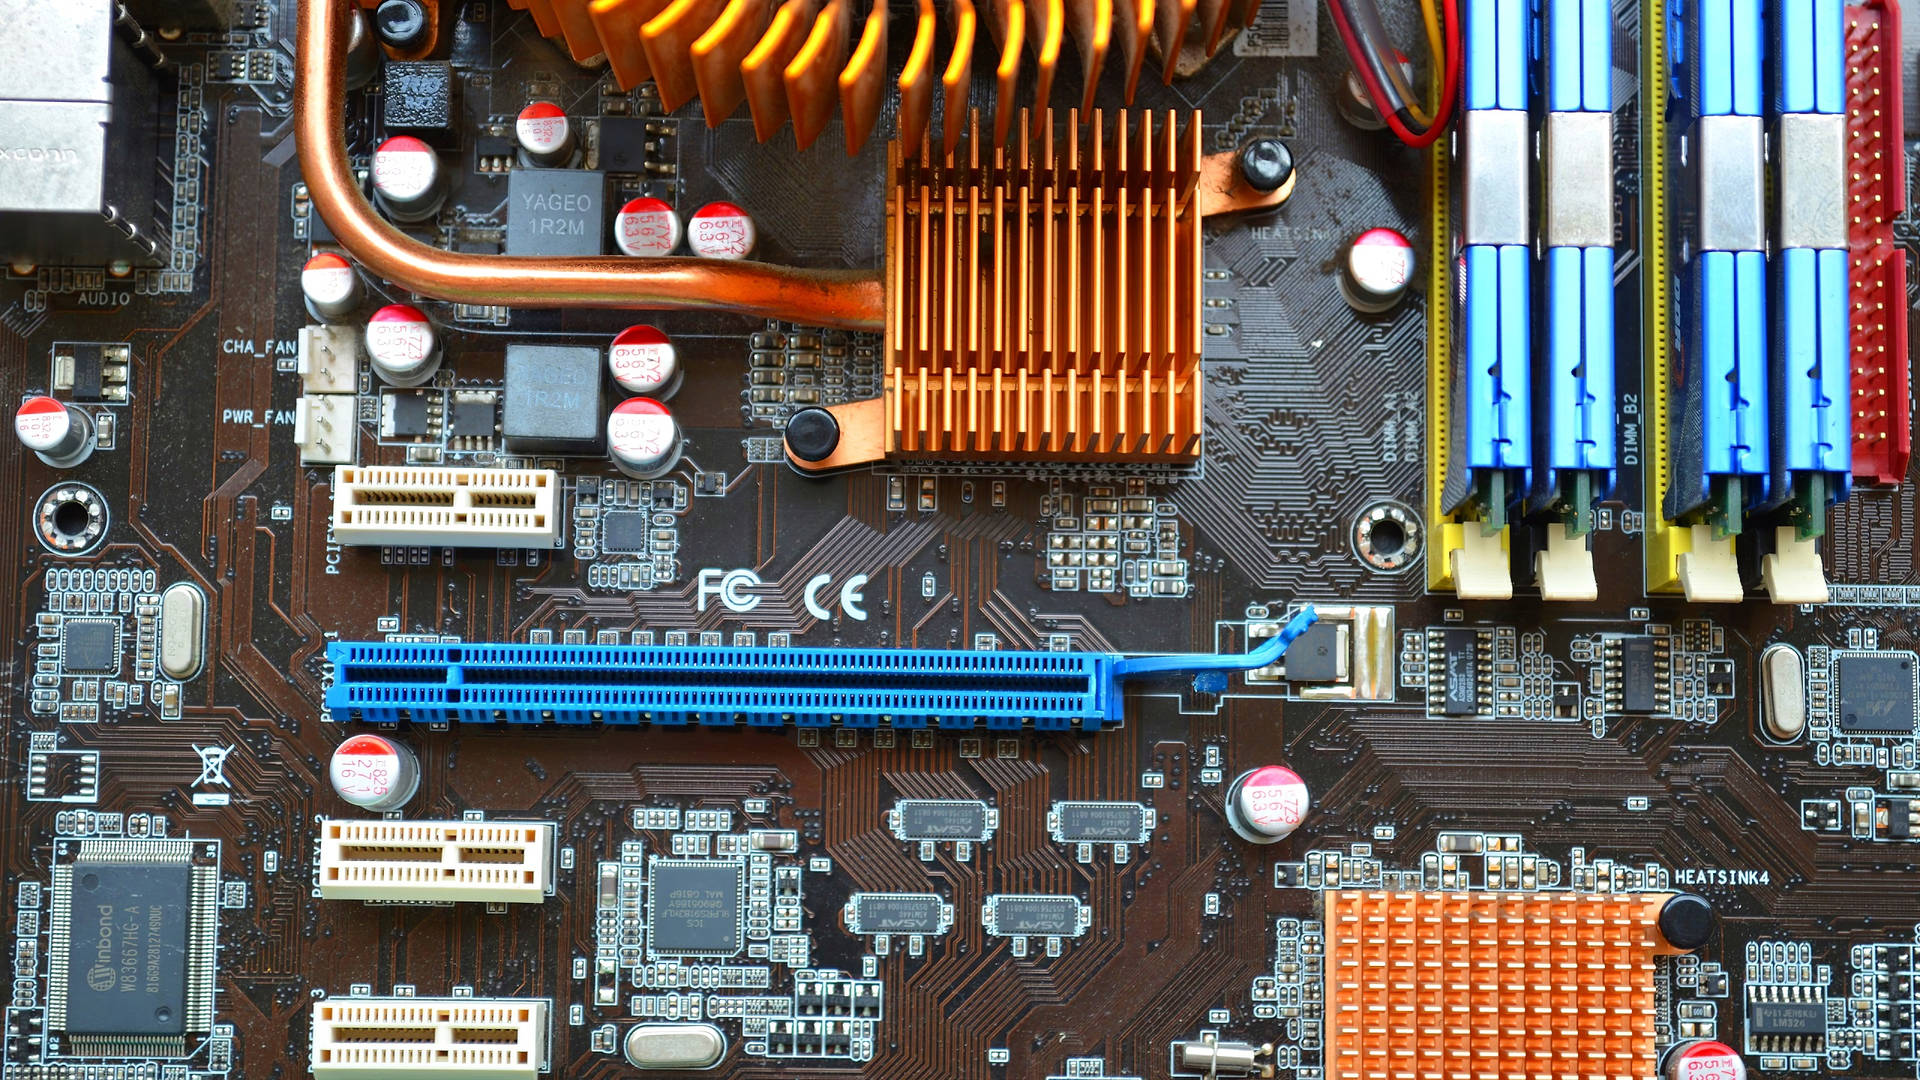 A Futuristic View Of Motherboard Circuitry